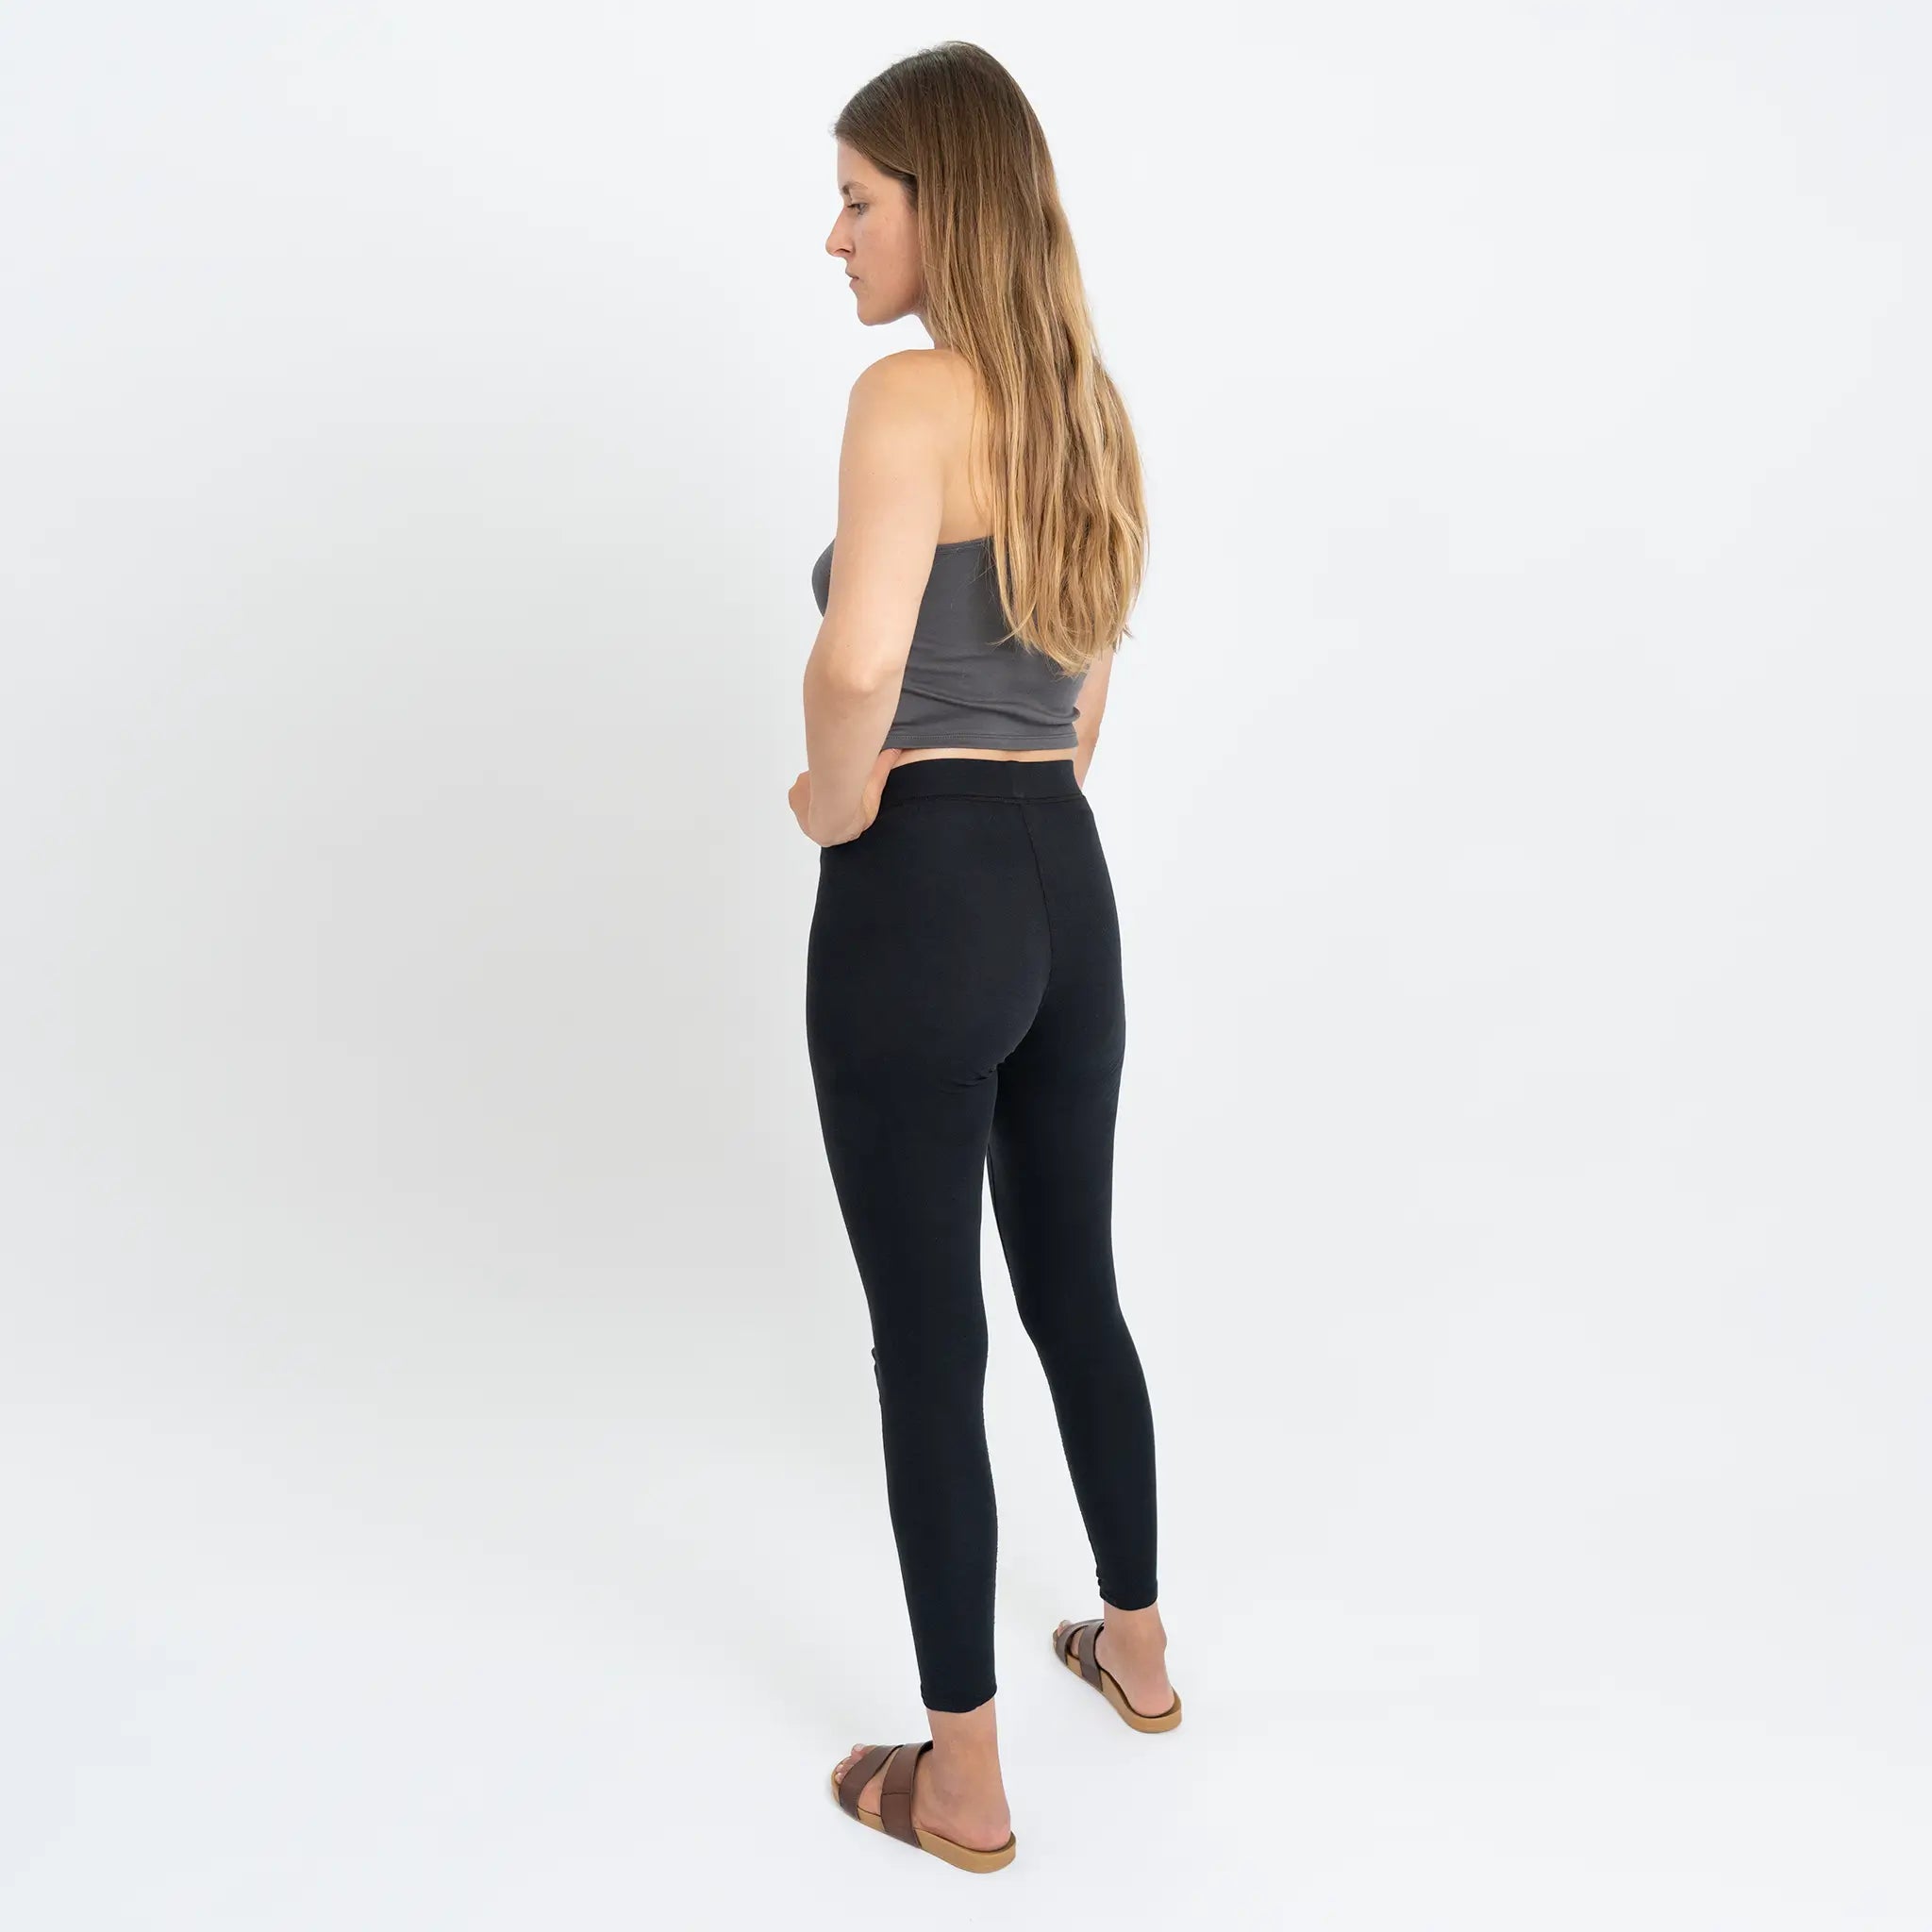 Buy SHAPERX Women Premium High Waist Cotton Leggings, Soft Light Weight  Leggings for Women Pack of 1 (L Grey) Online In India At Discounted Prices